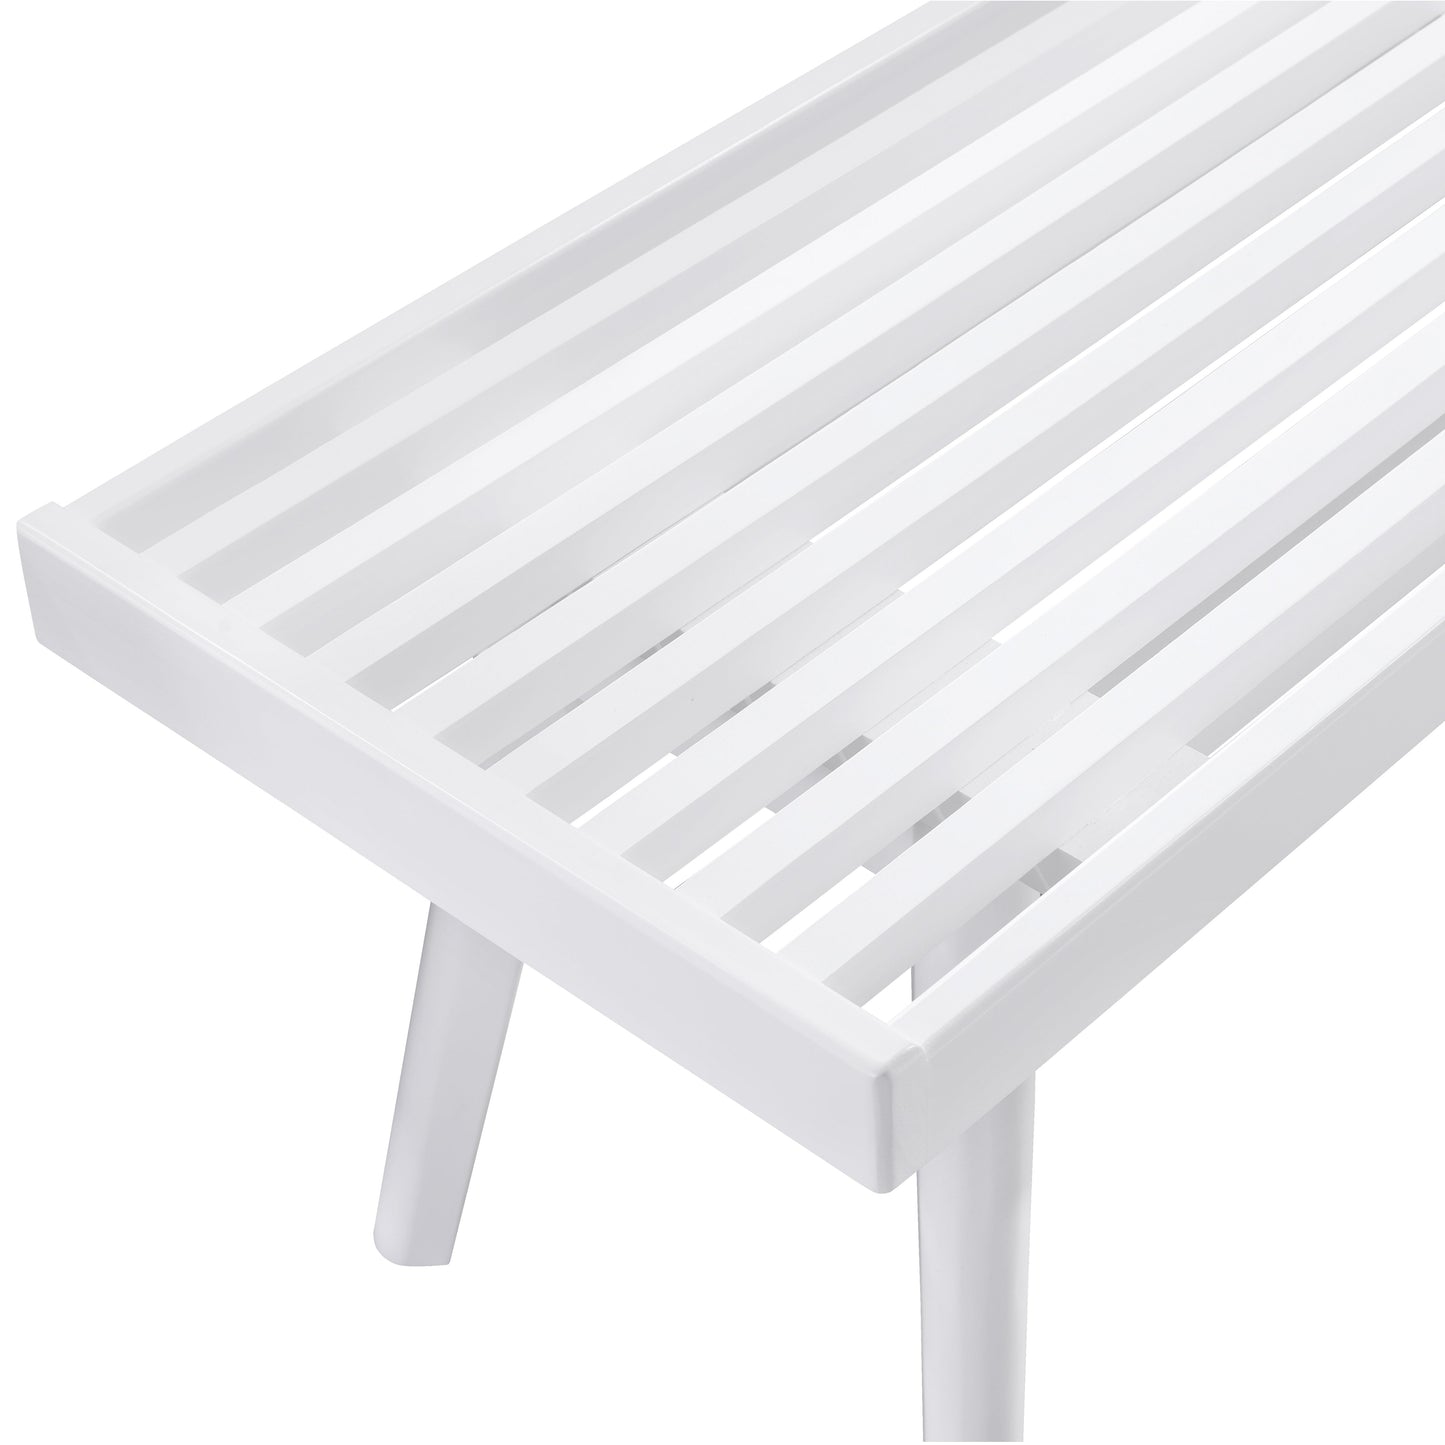 Larwich Solid Wood Slatted Bench, 56.30-Inch Long, White